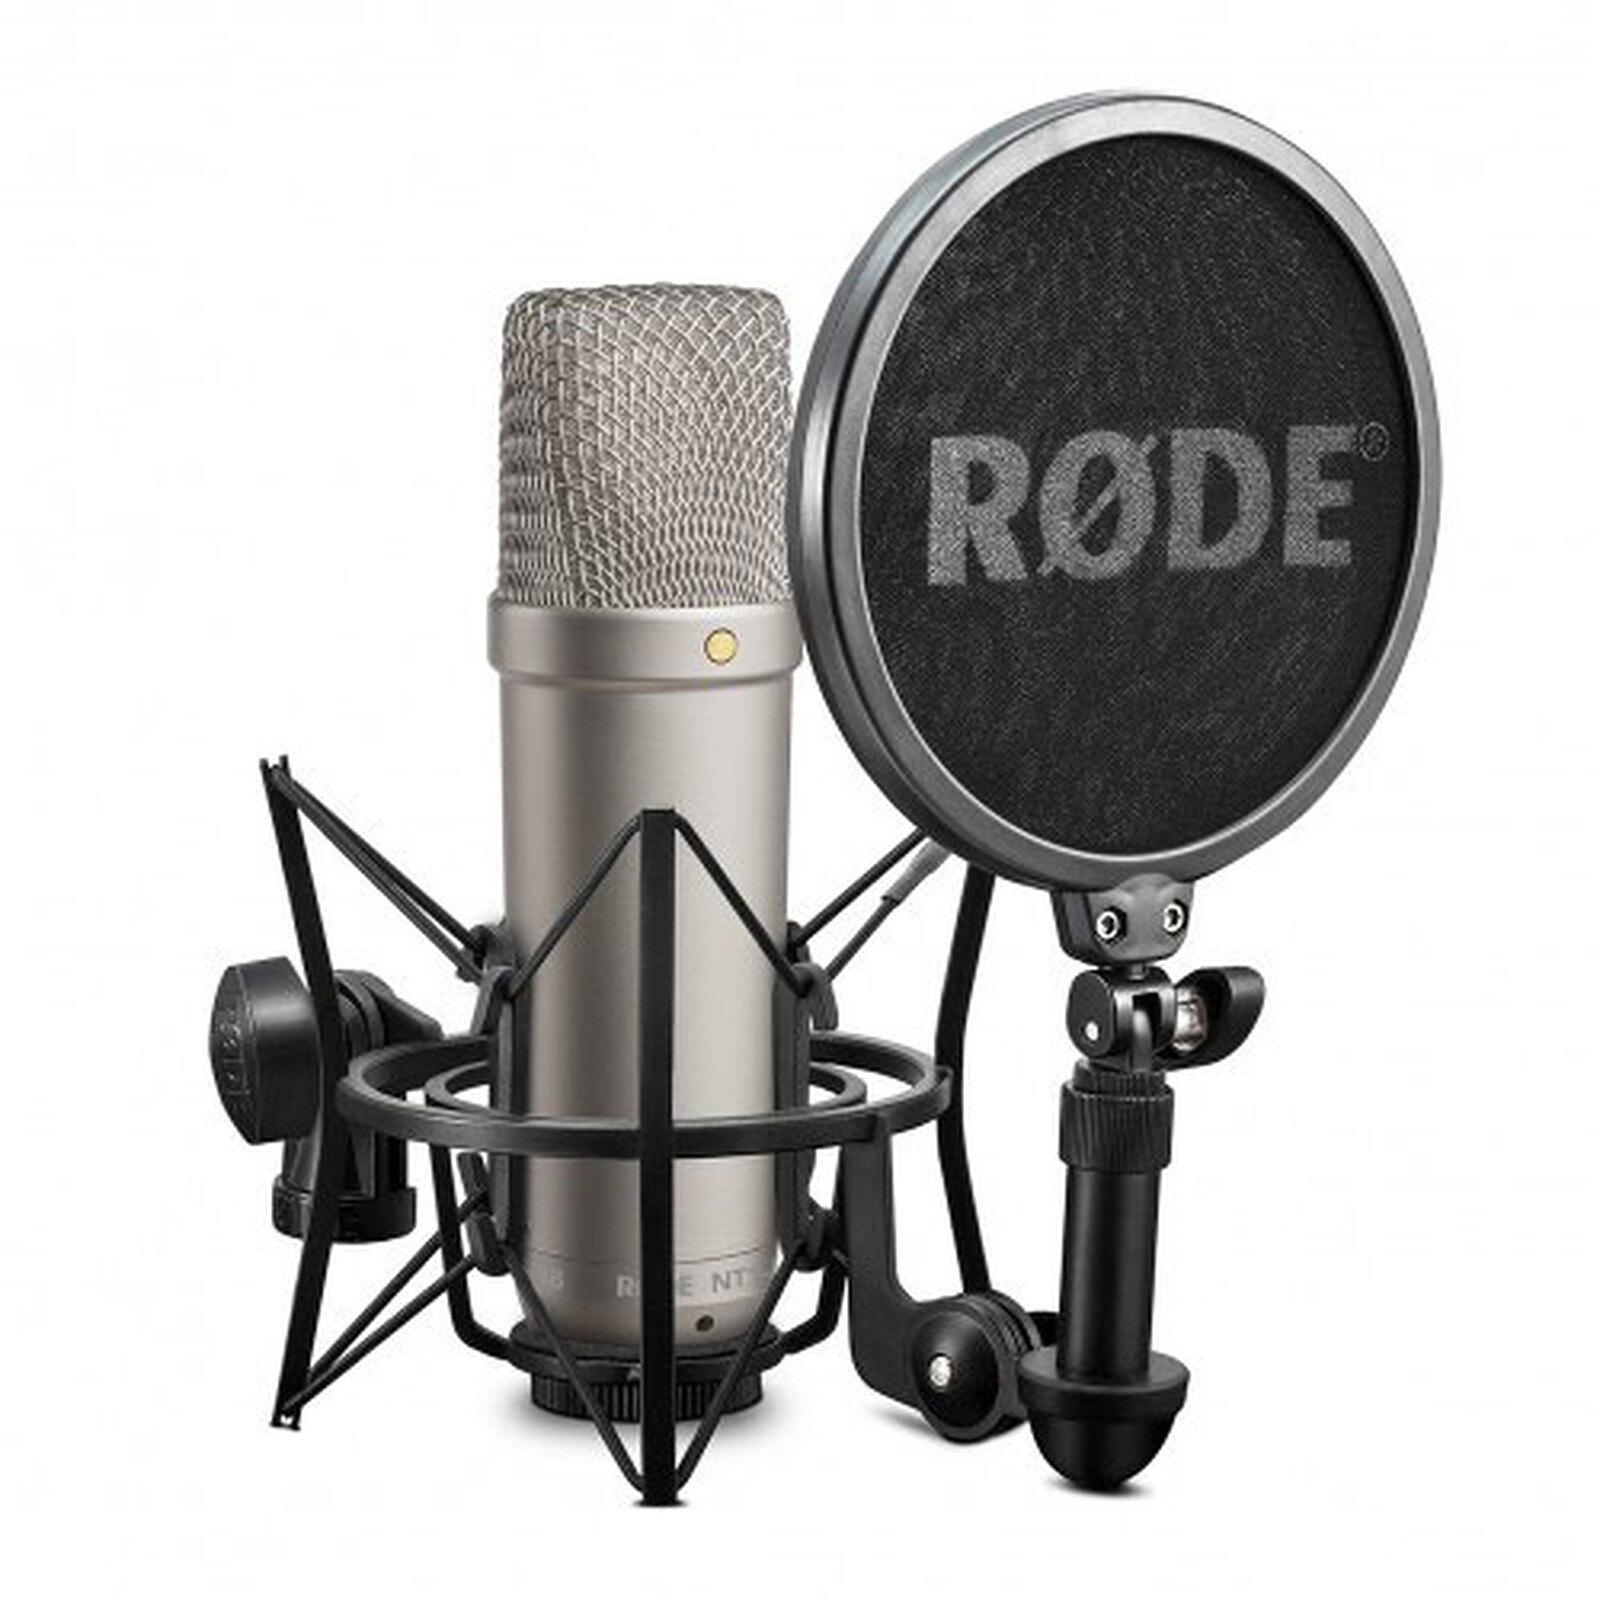 RODE NT1-A - Microphone - LDLC 3-year warranty